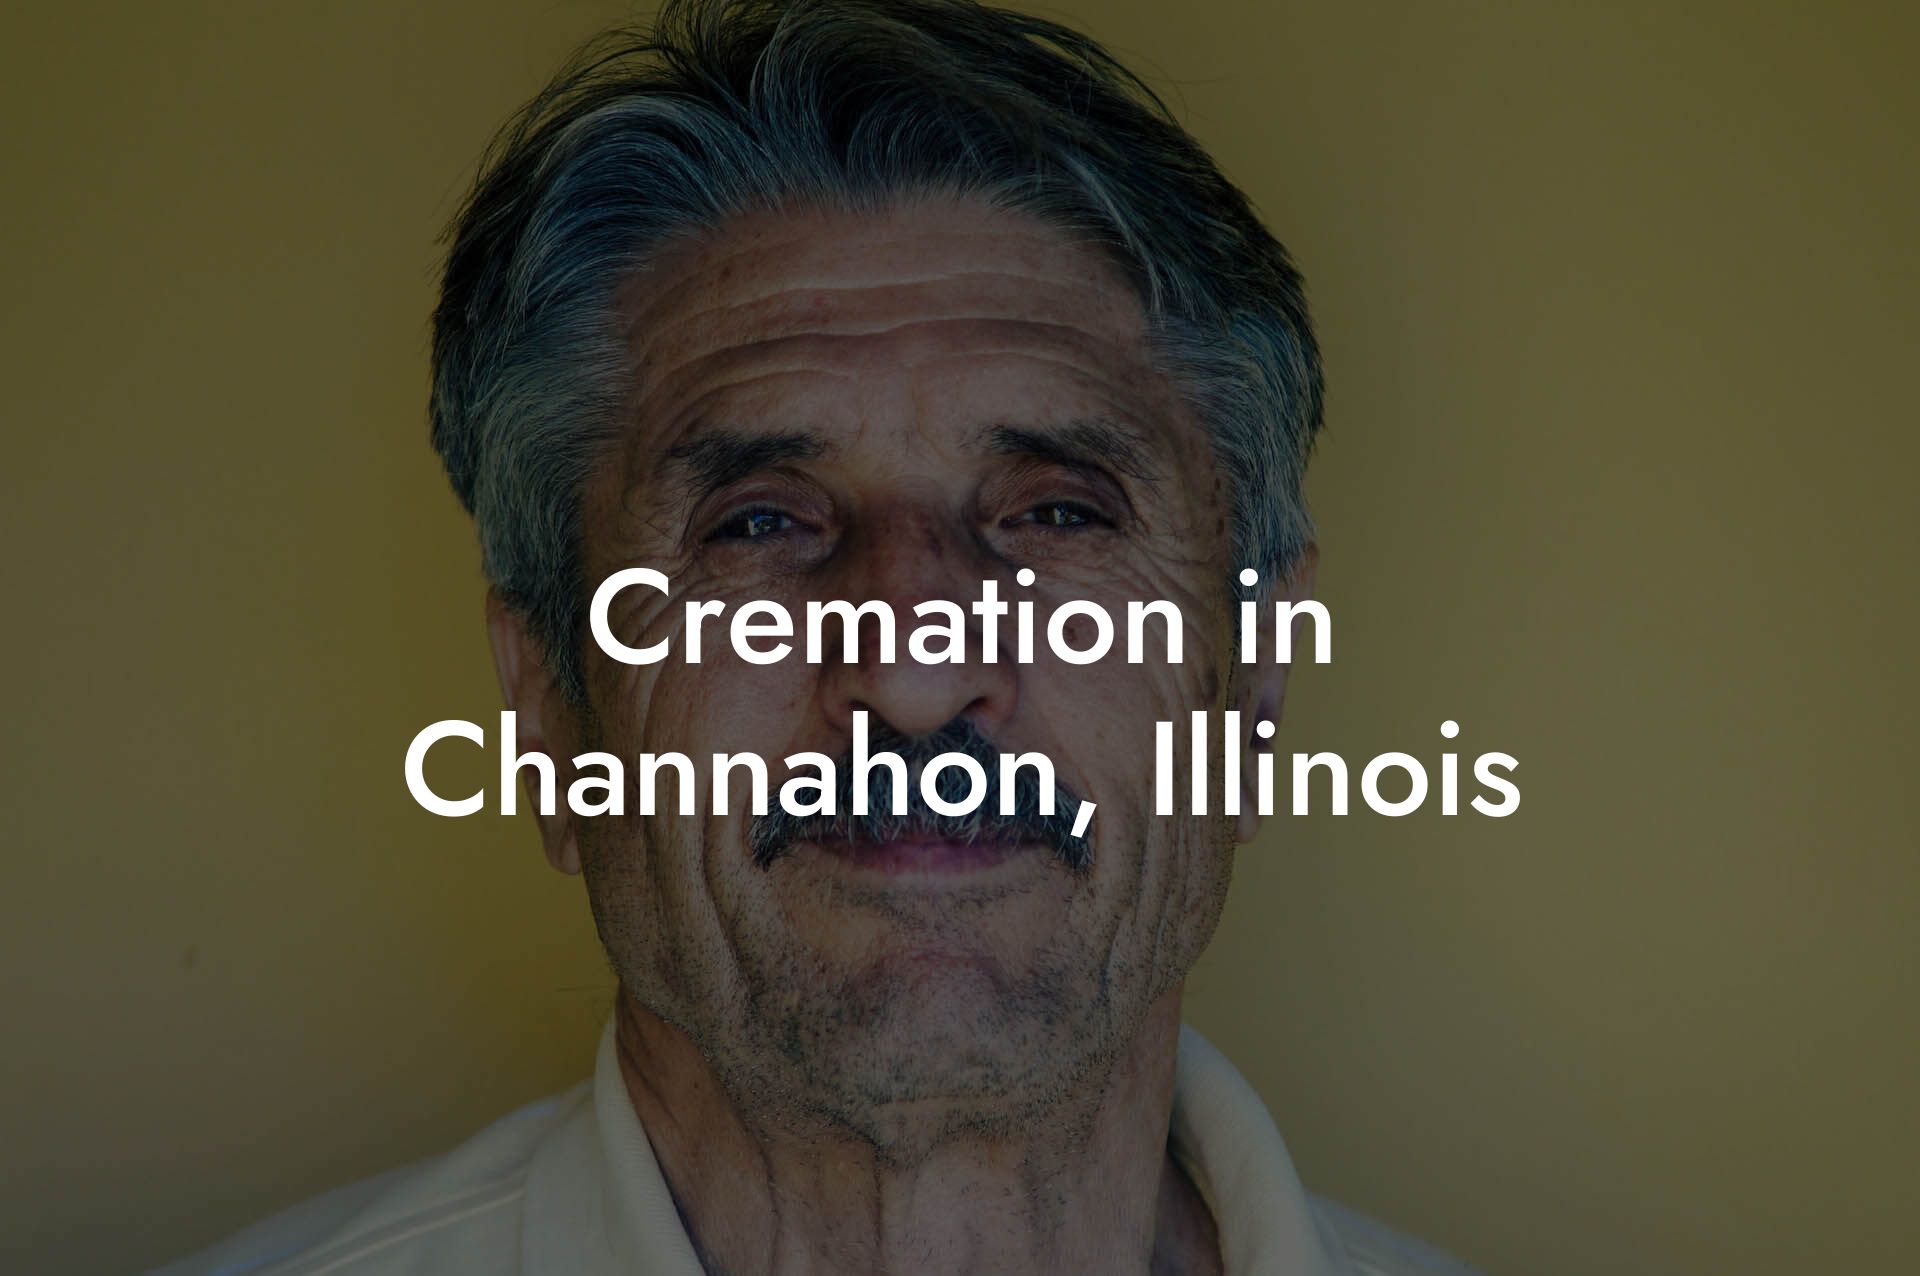 Cremation in Channahon, Illinois